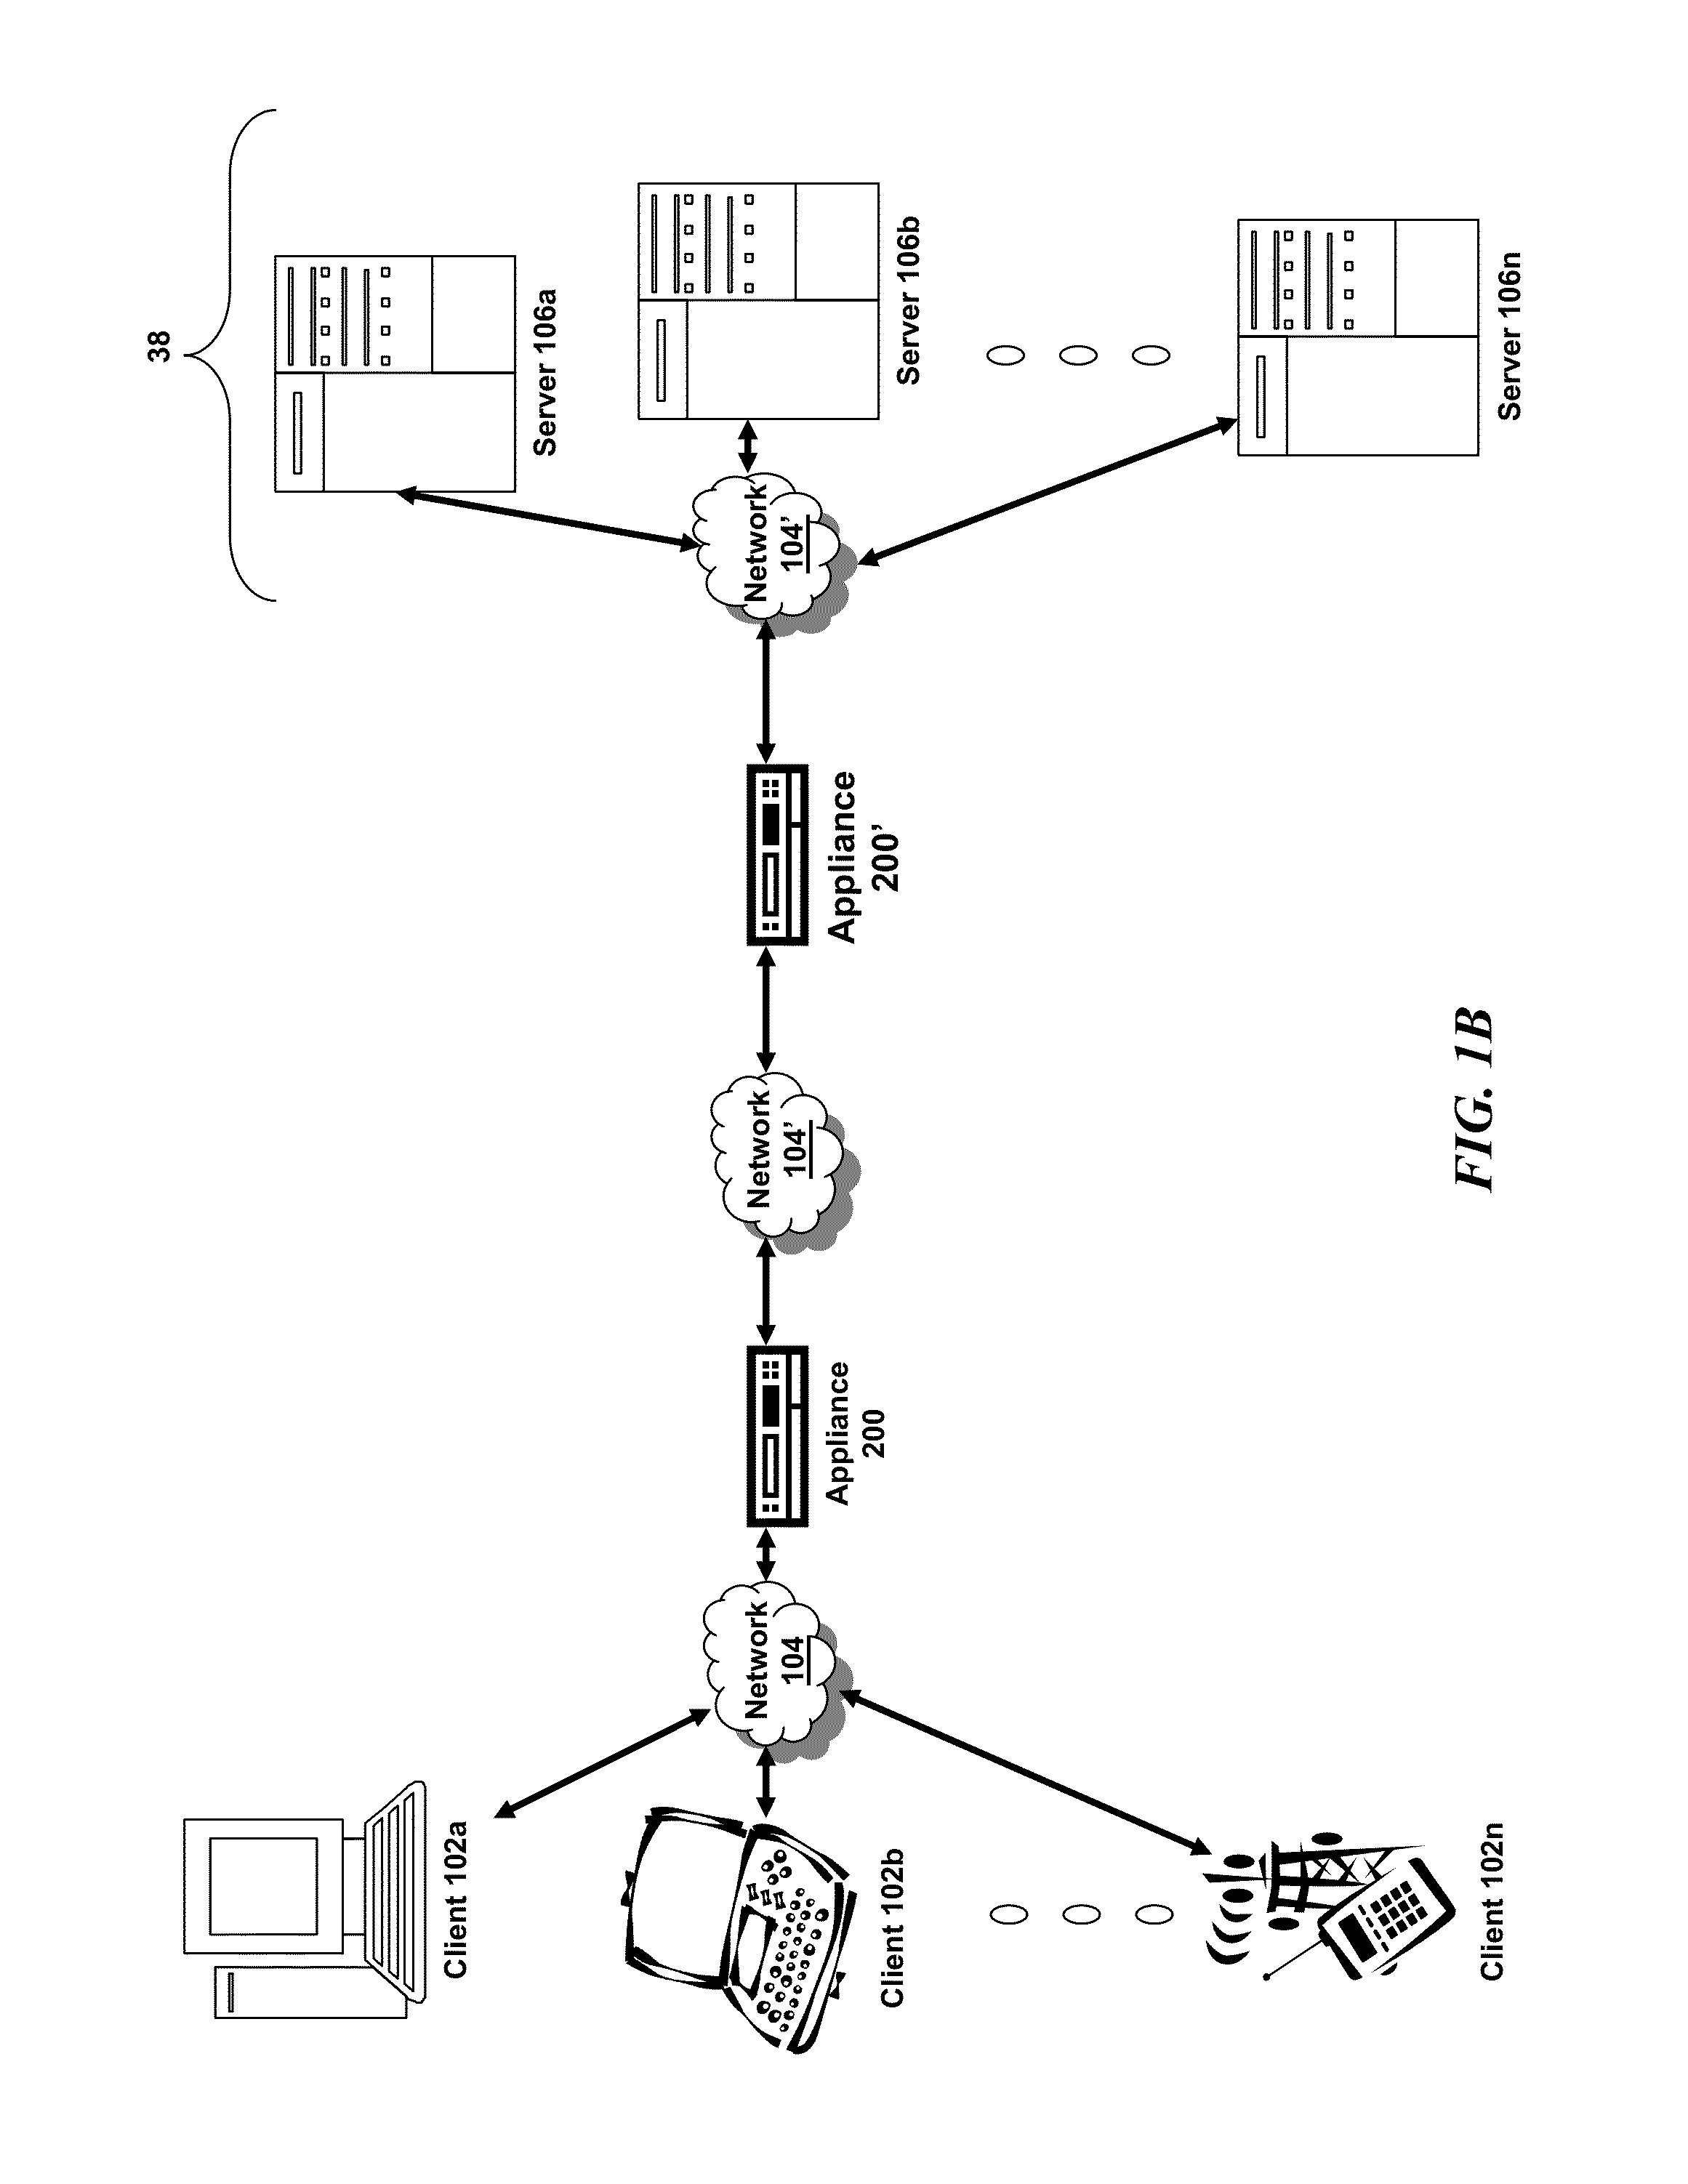 Systems and methods for connection management for asynchronous messaging over HTTP